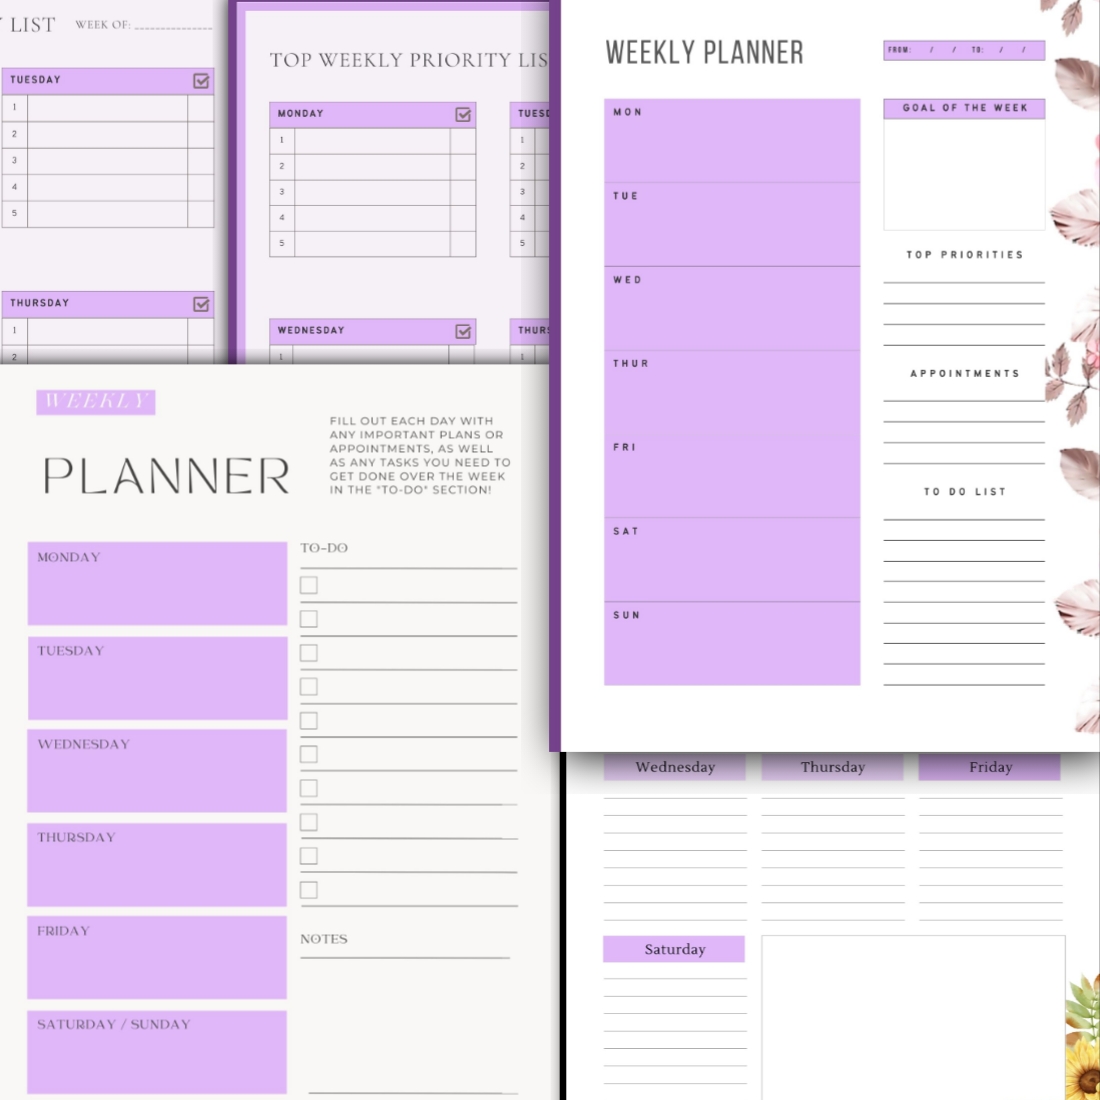 Free Weekly planner Templates bundles | Weekly Routine Planner Templates cover image.